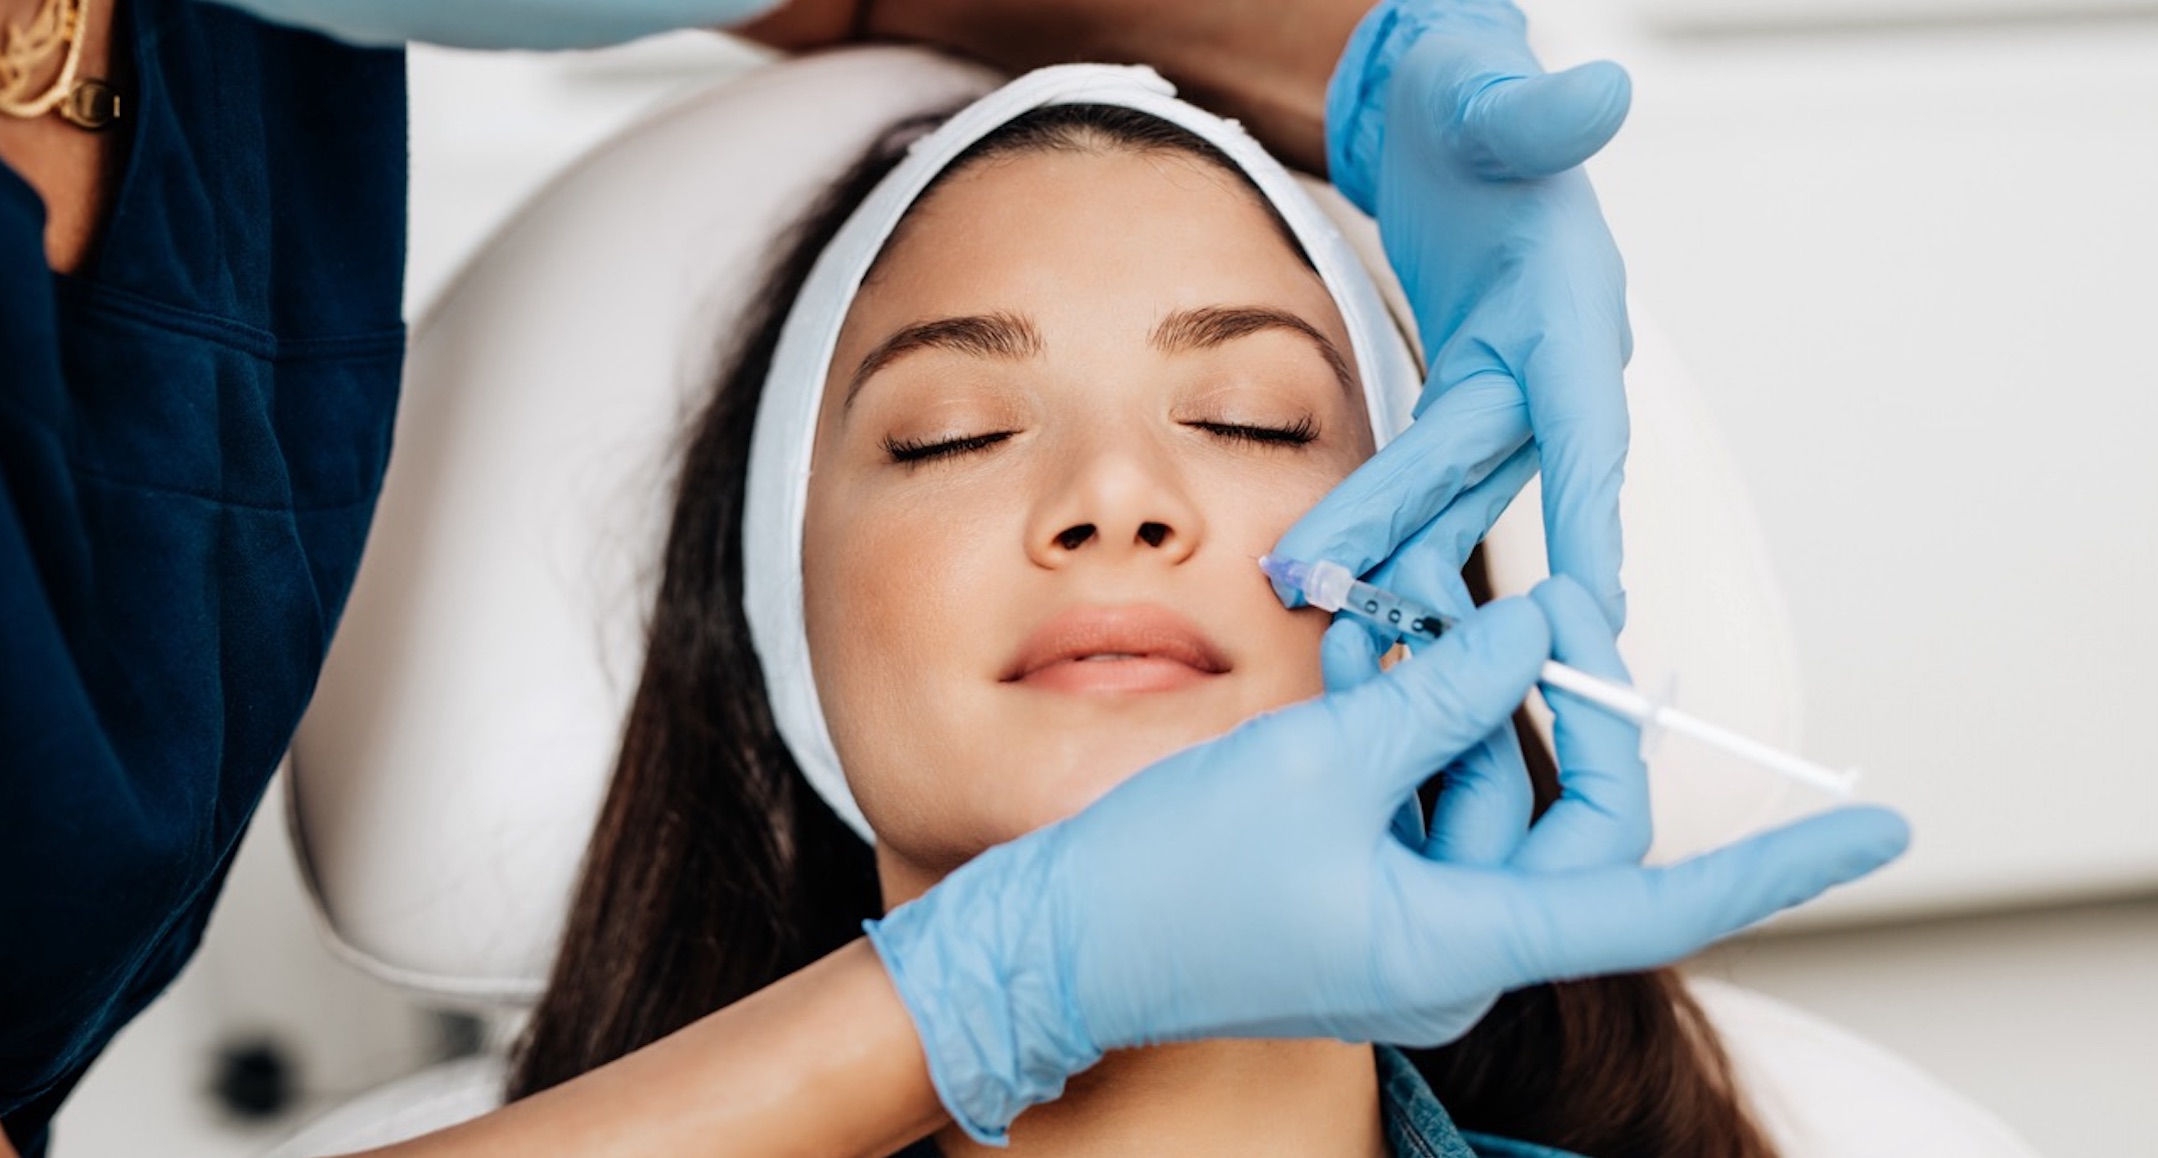 Top 5 Tips For Best Results From Your Injectables